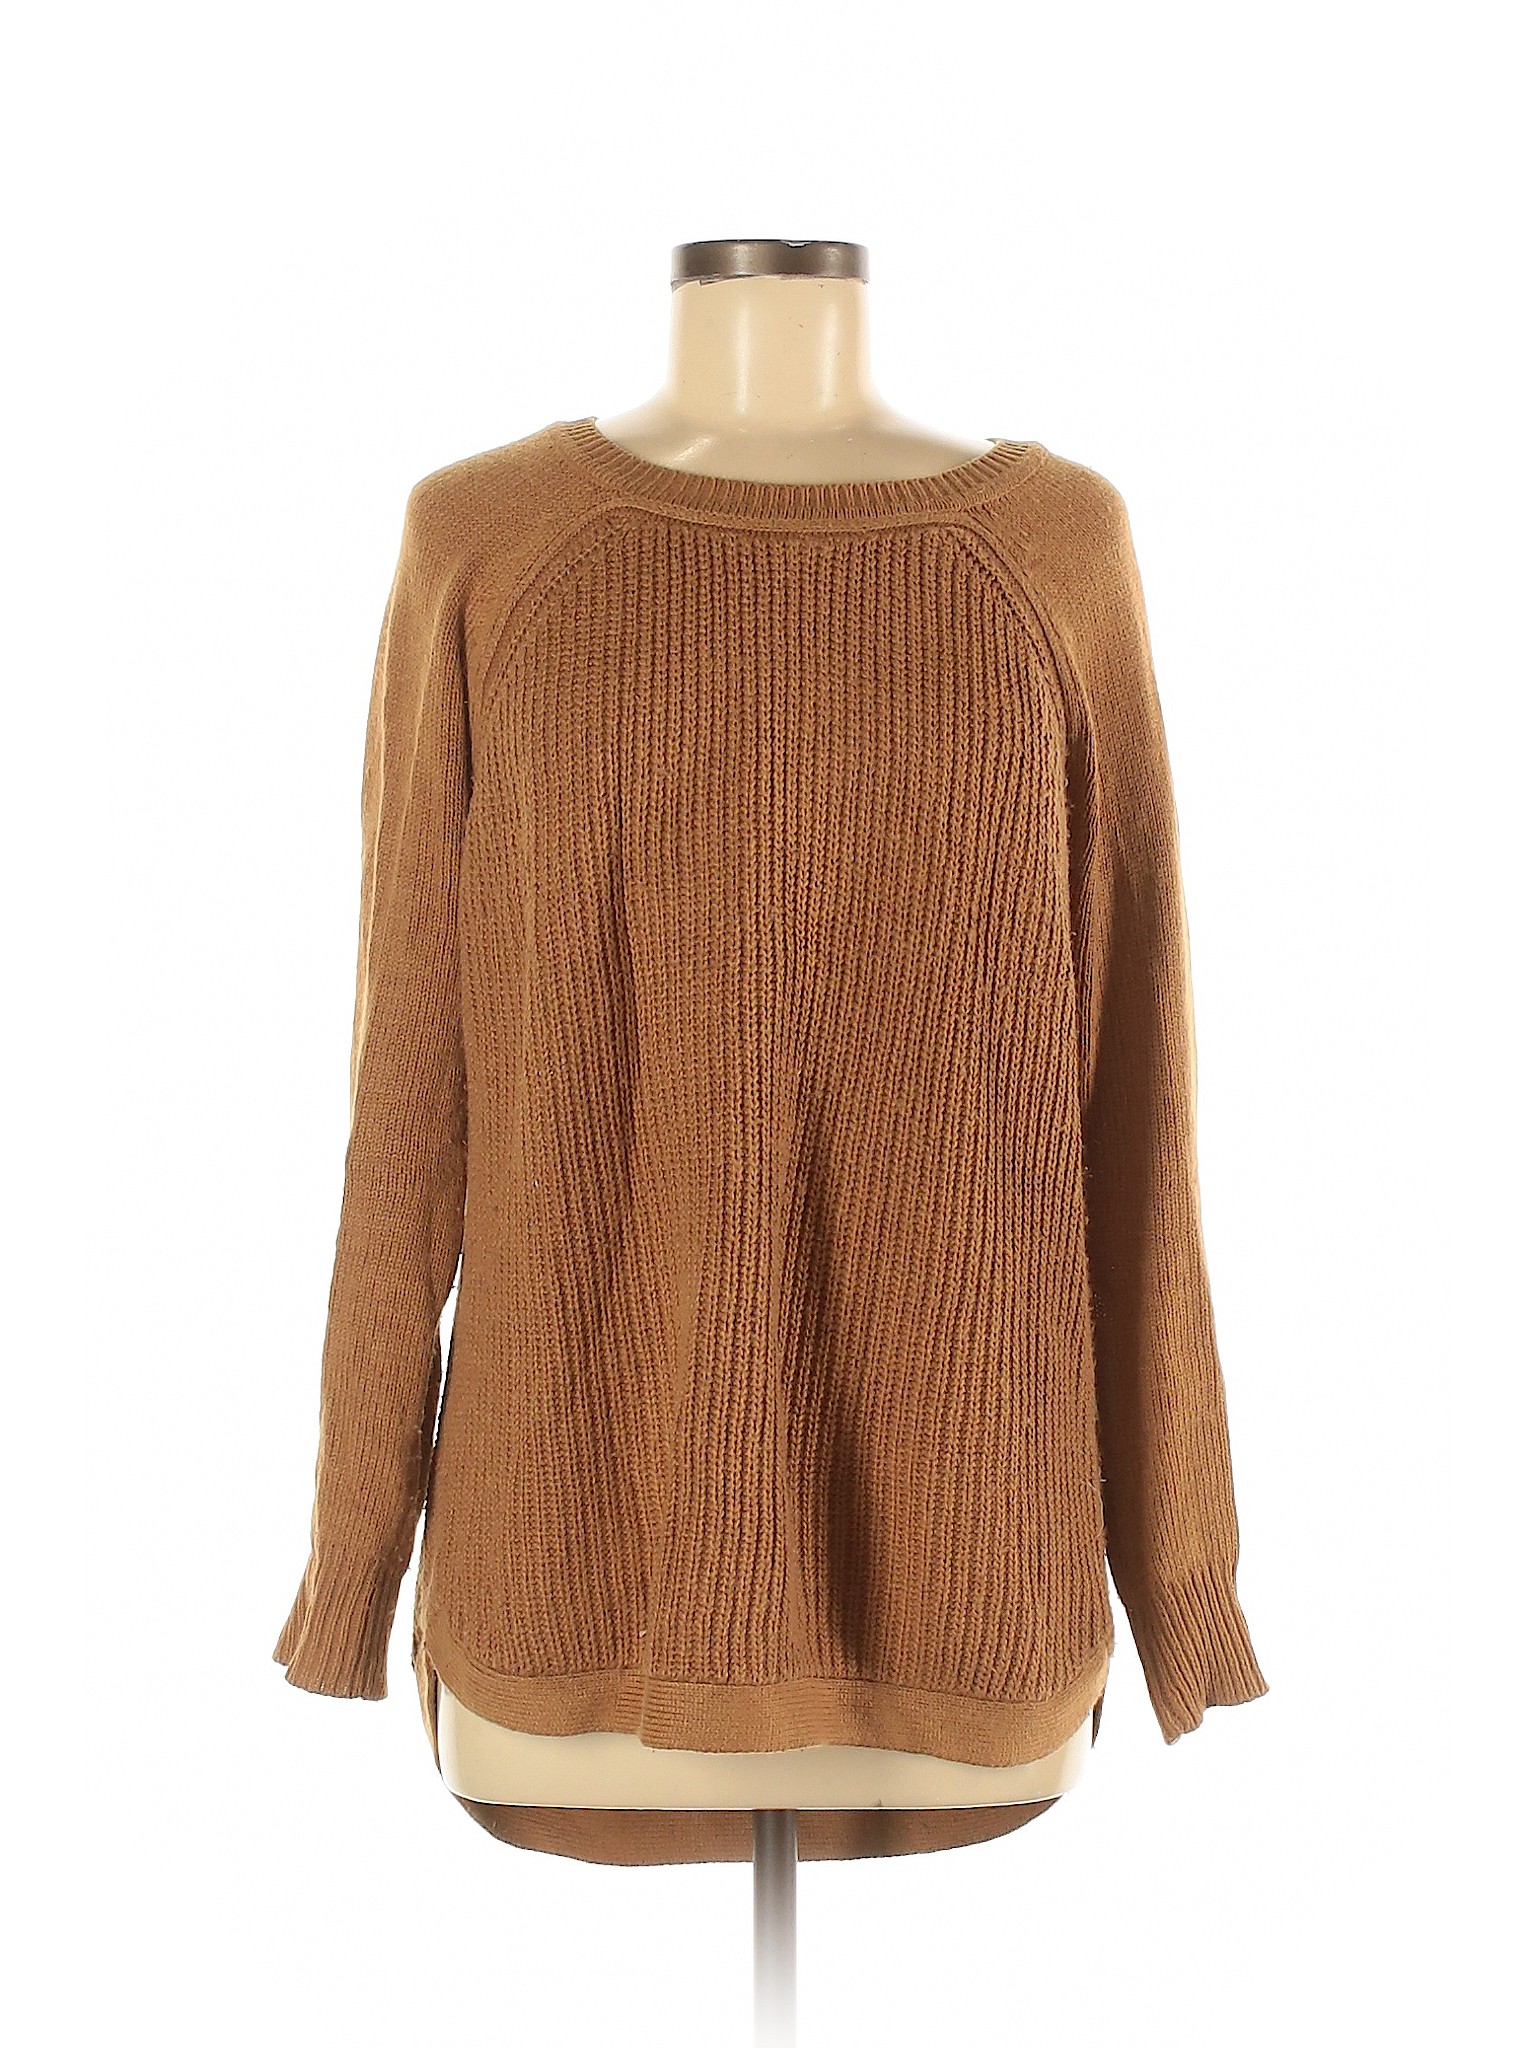 RD Style Women Brown Pullover Sweater M | eBay